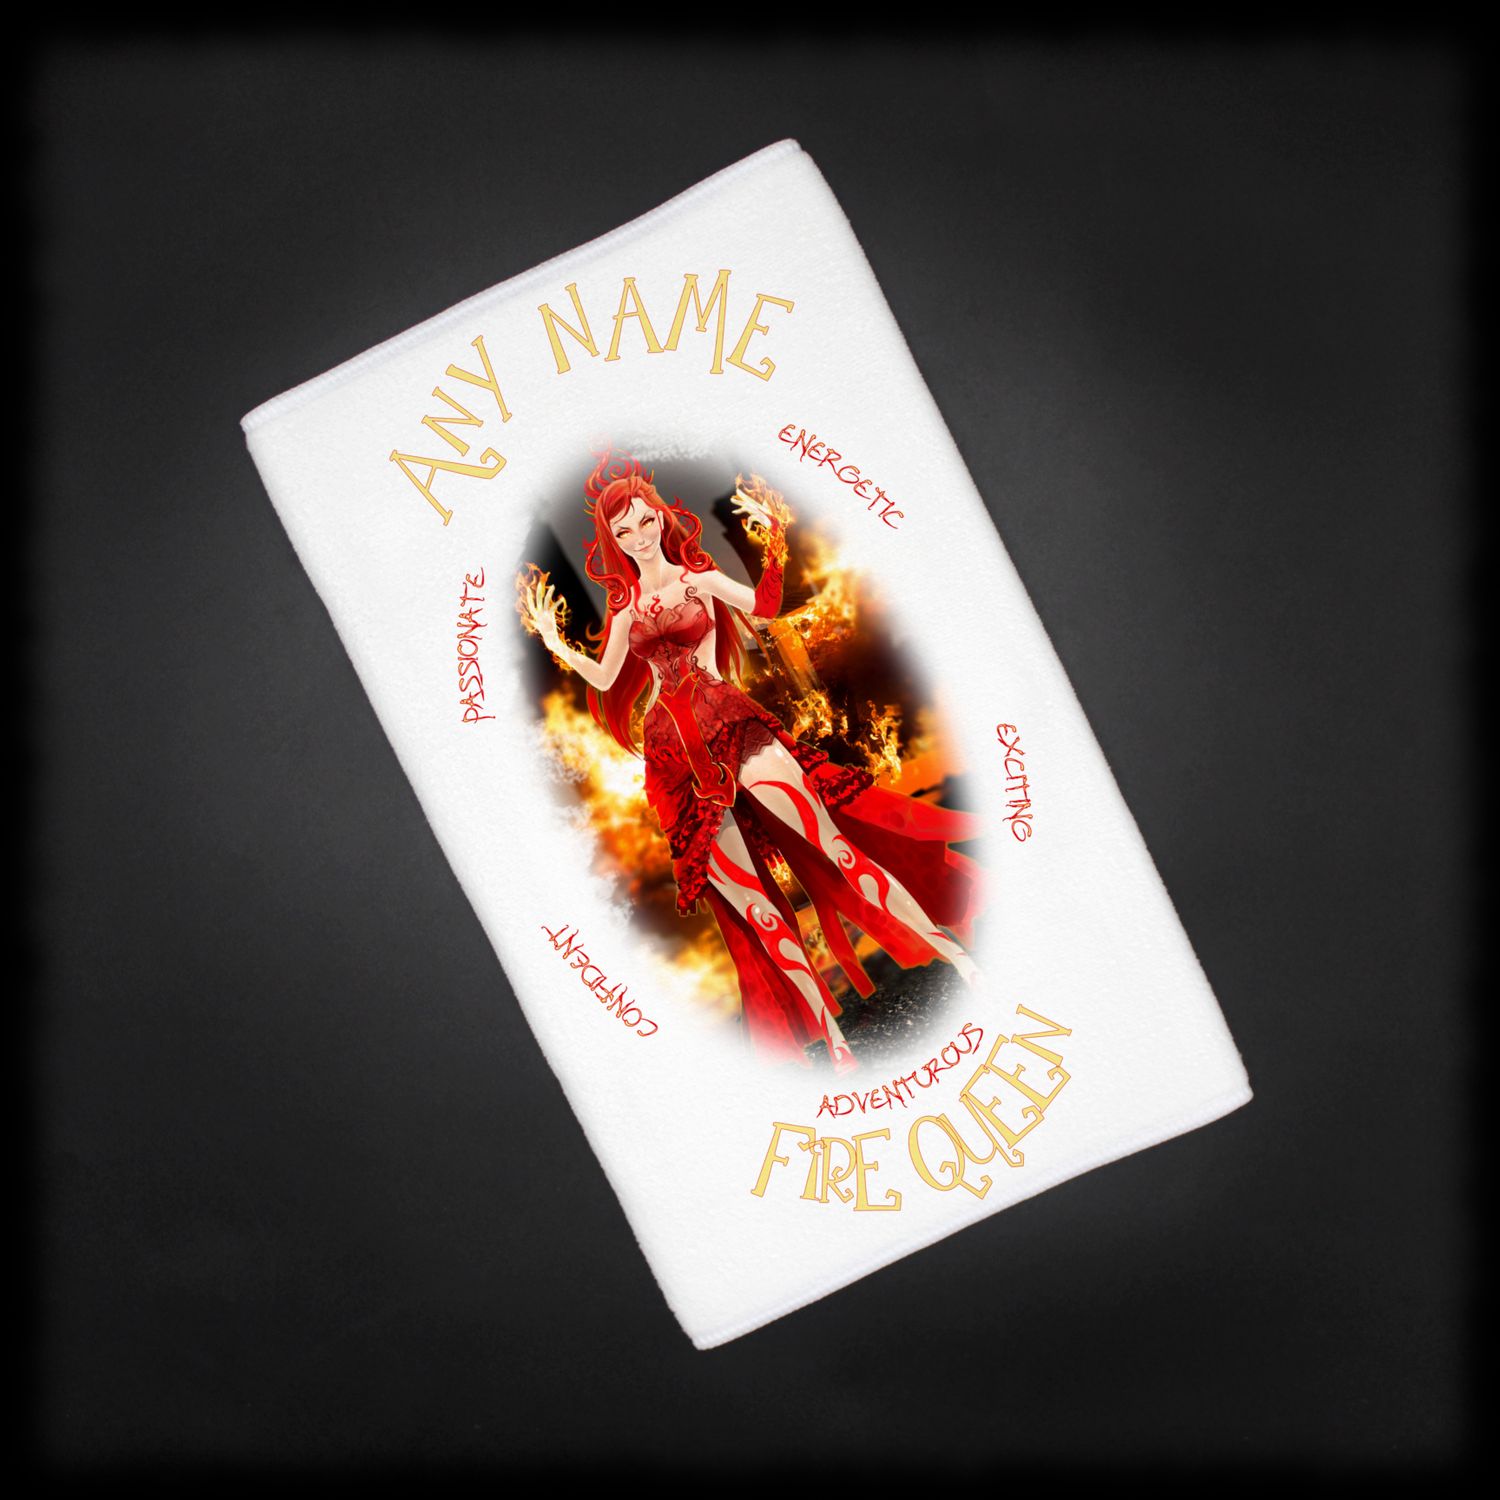 Wicked Fire Queen Personalised Gift Towel Customised With Any Name & Naturally Wicked Fire Queen Traits